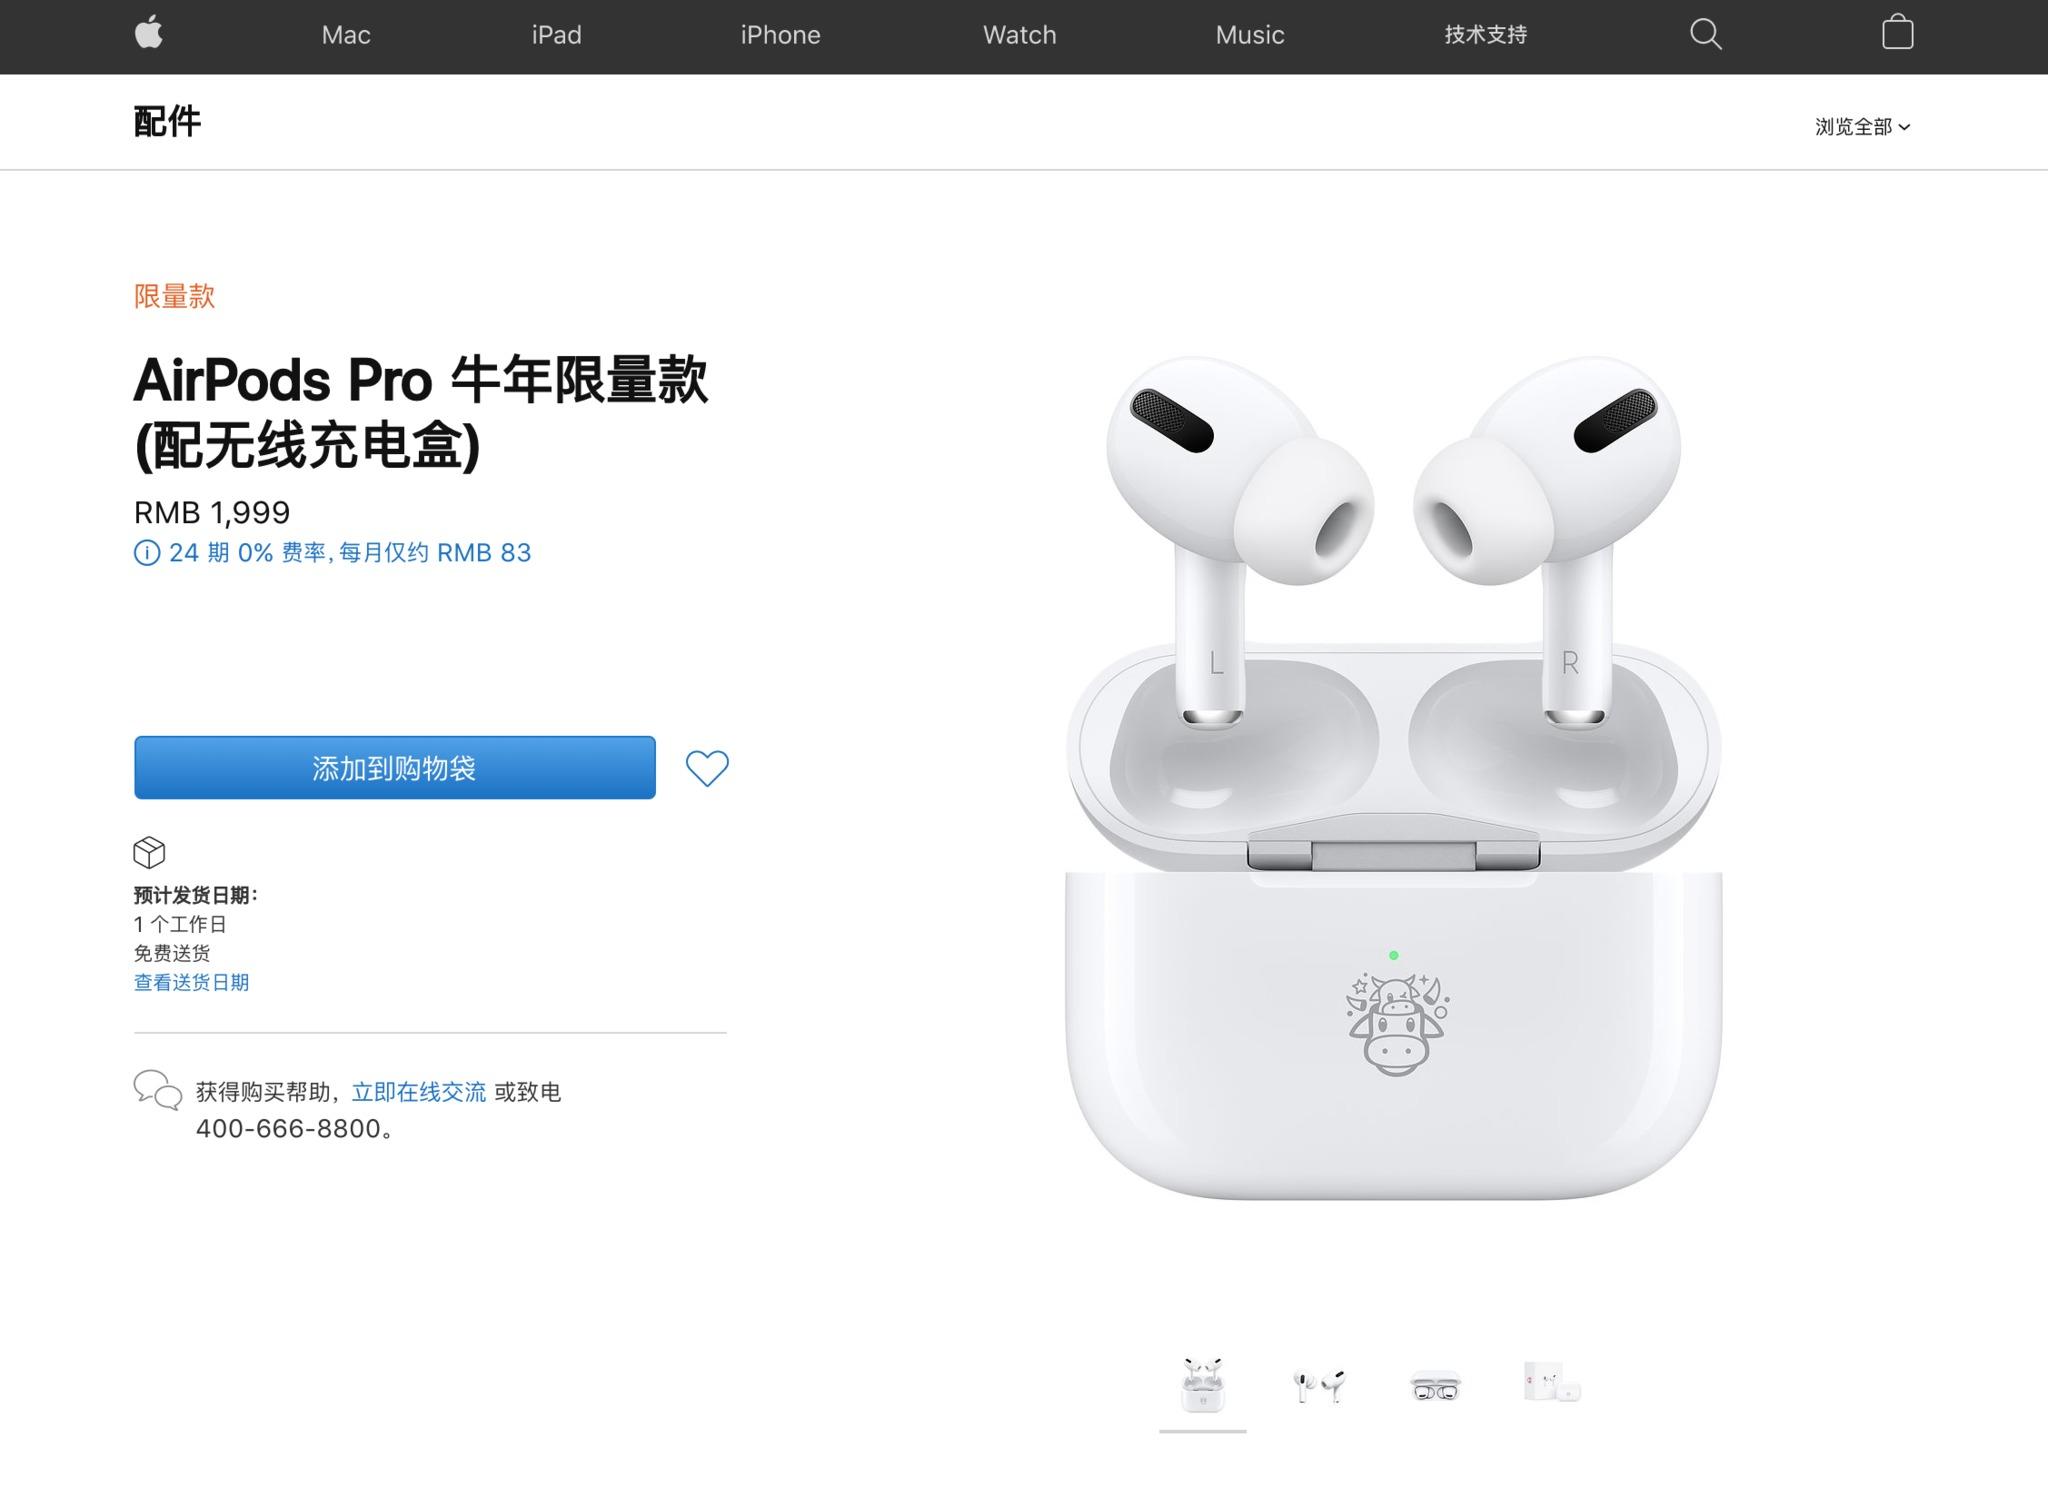 Apple releases limited edition AirPods Pro to celebrate Chinese 